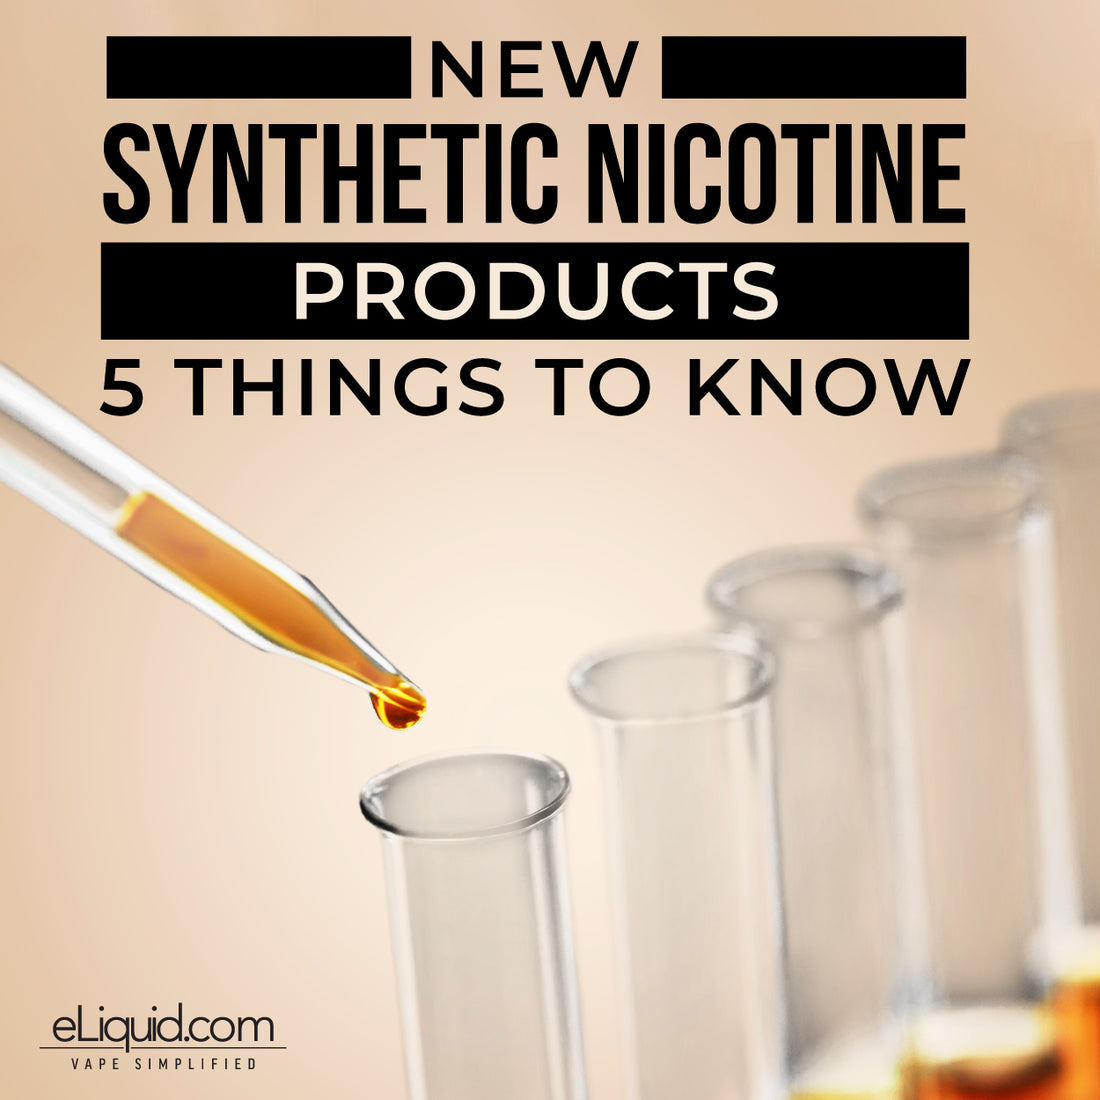 New Synthetic Nicotine Products: 5 Things To Know